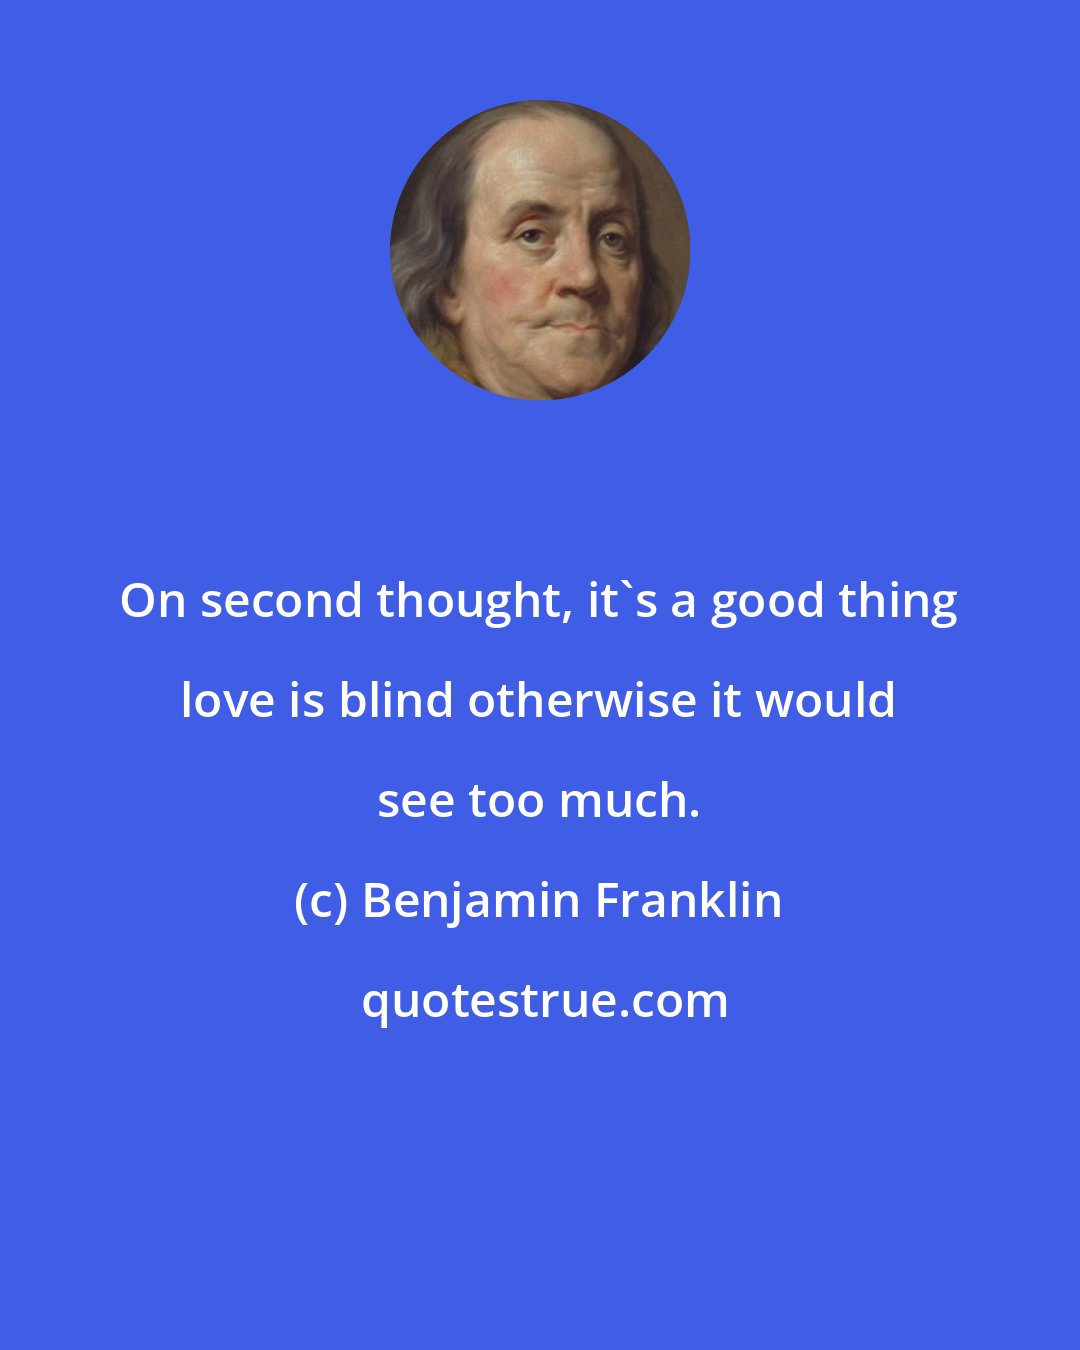 Benjamin Franklin: On second thought, it's a good thing love is blind otherwise it would see too much.